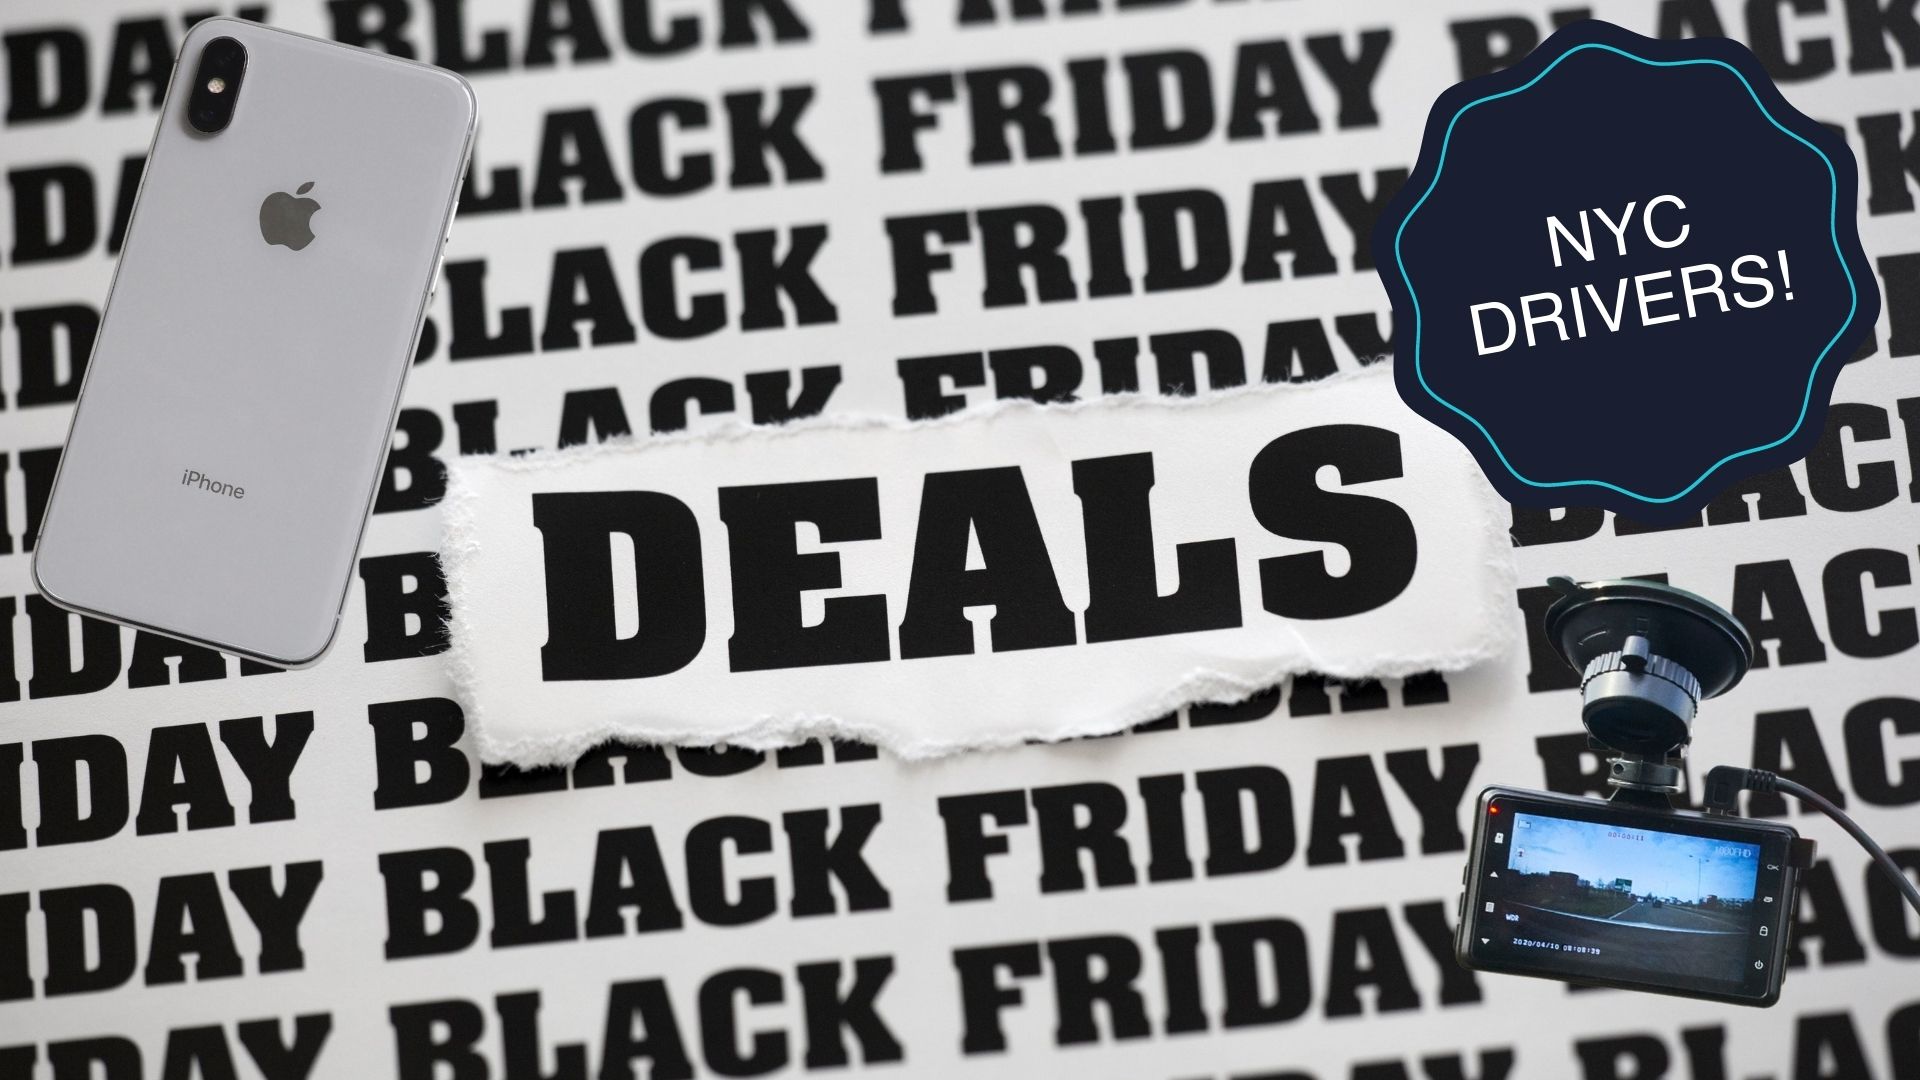 The best Black Friday deals for TLC drivers in NYC